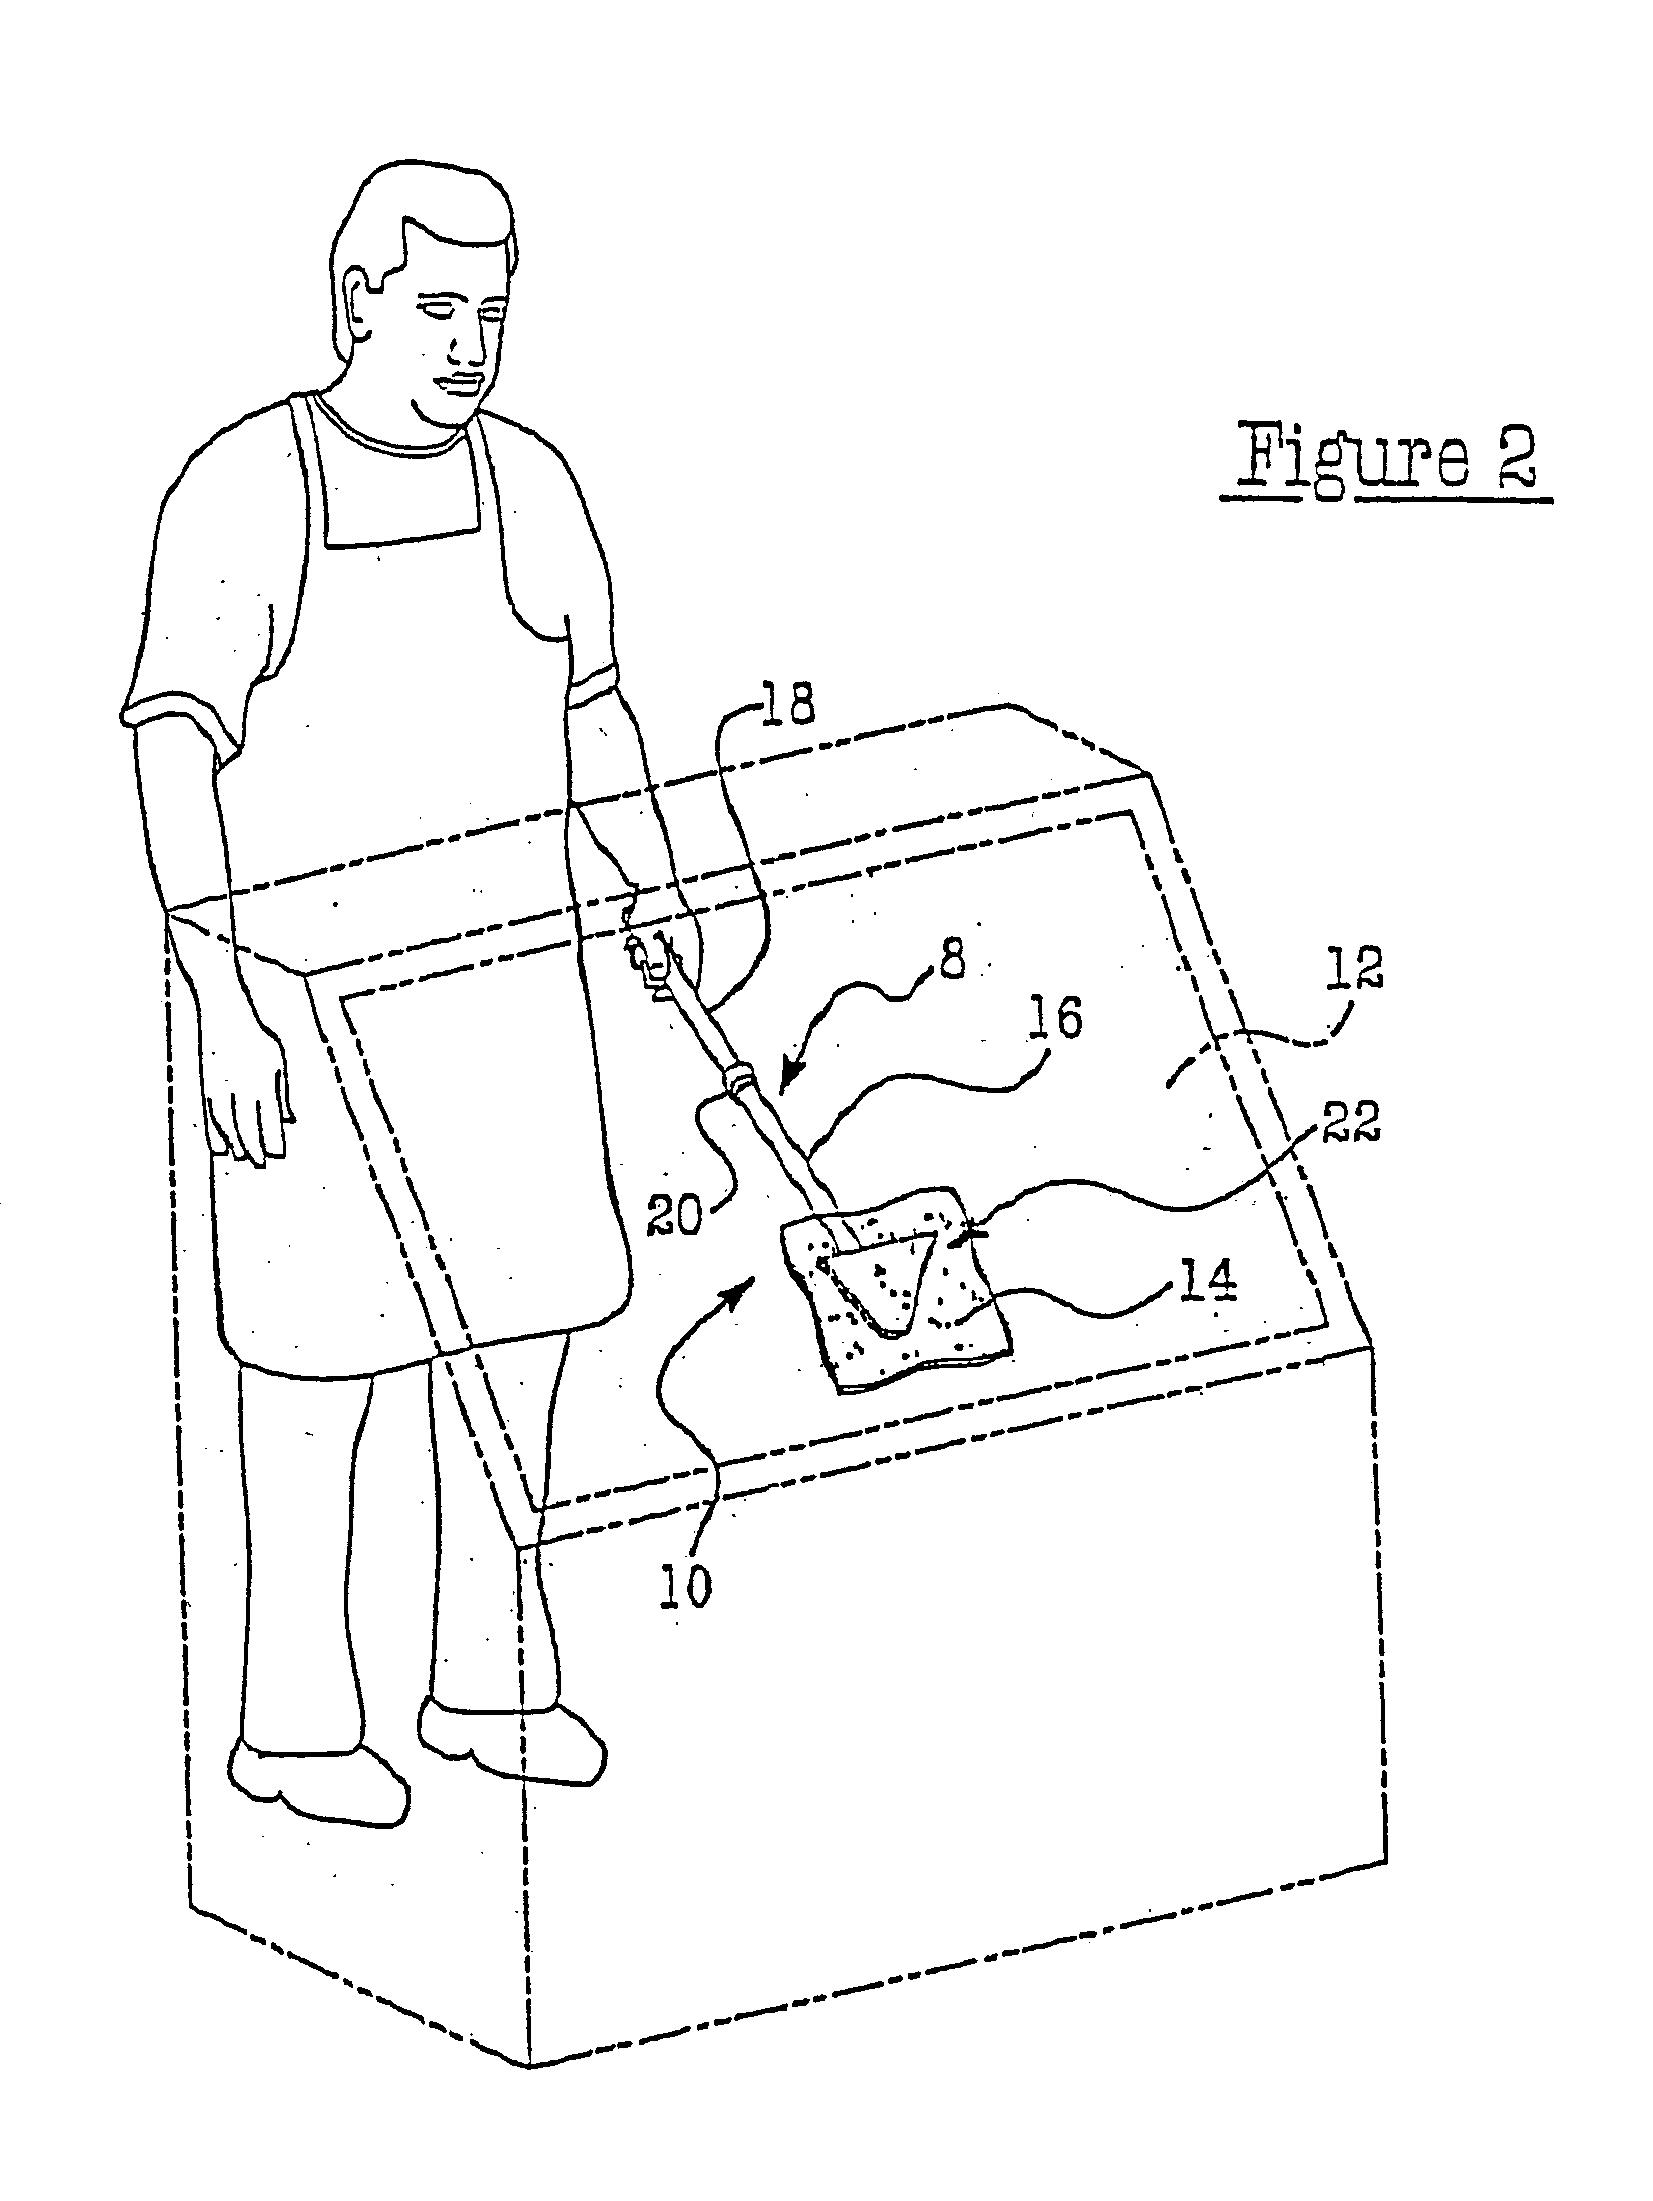 Apparatus for cleaning or otherwise engaging glass or another surface and method for using the same